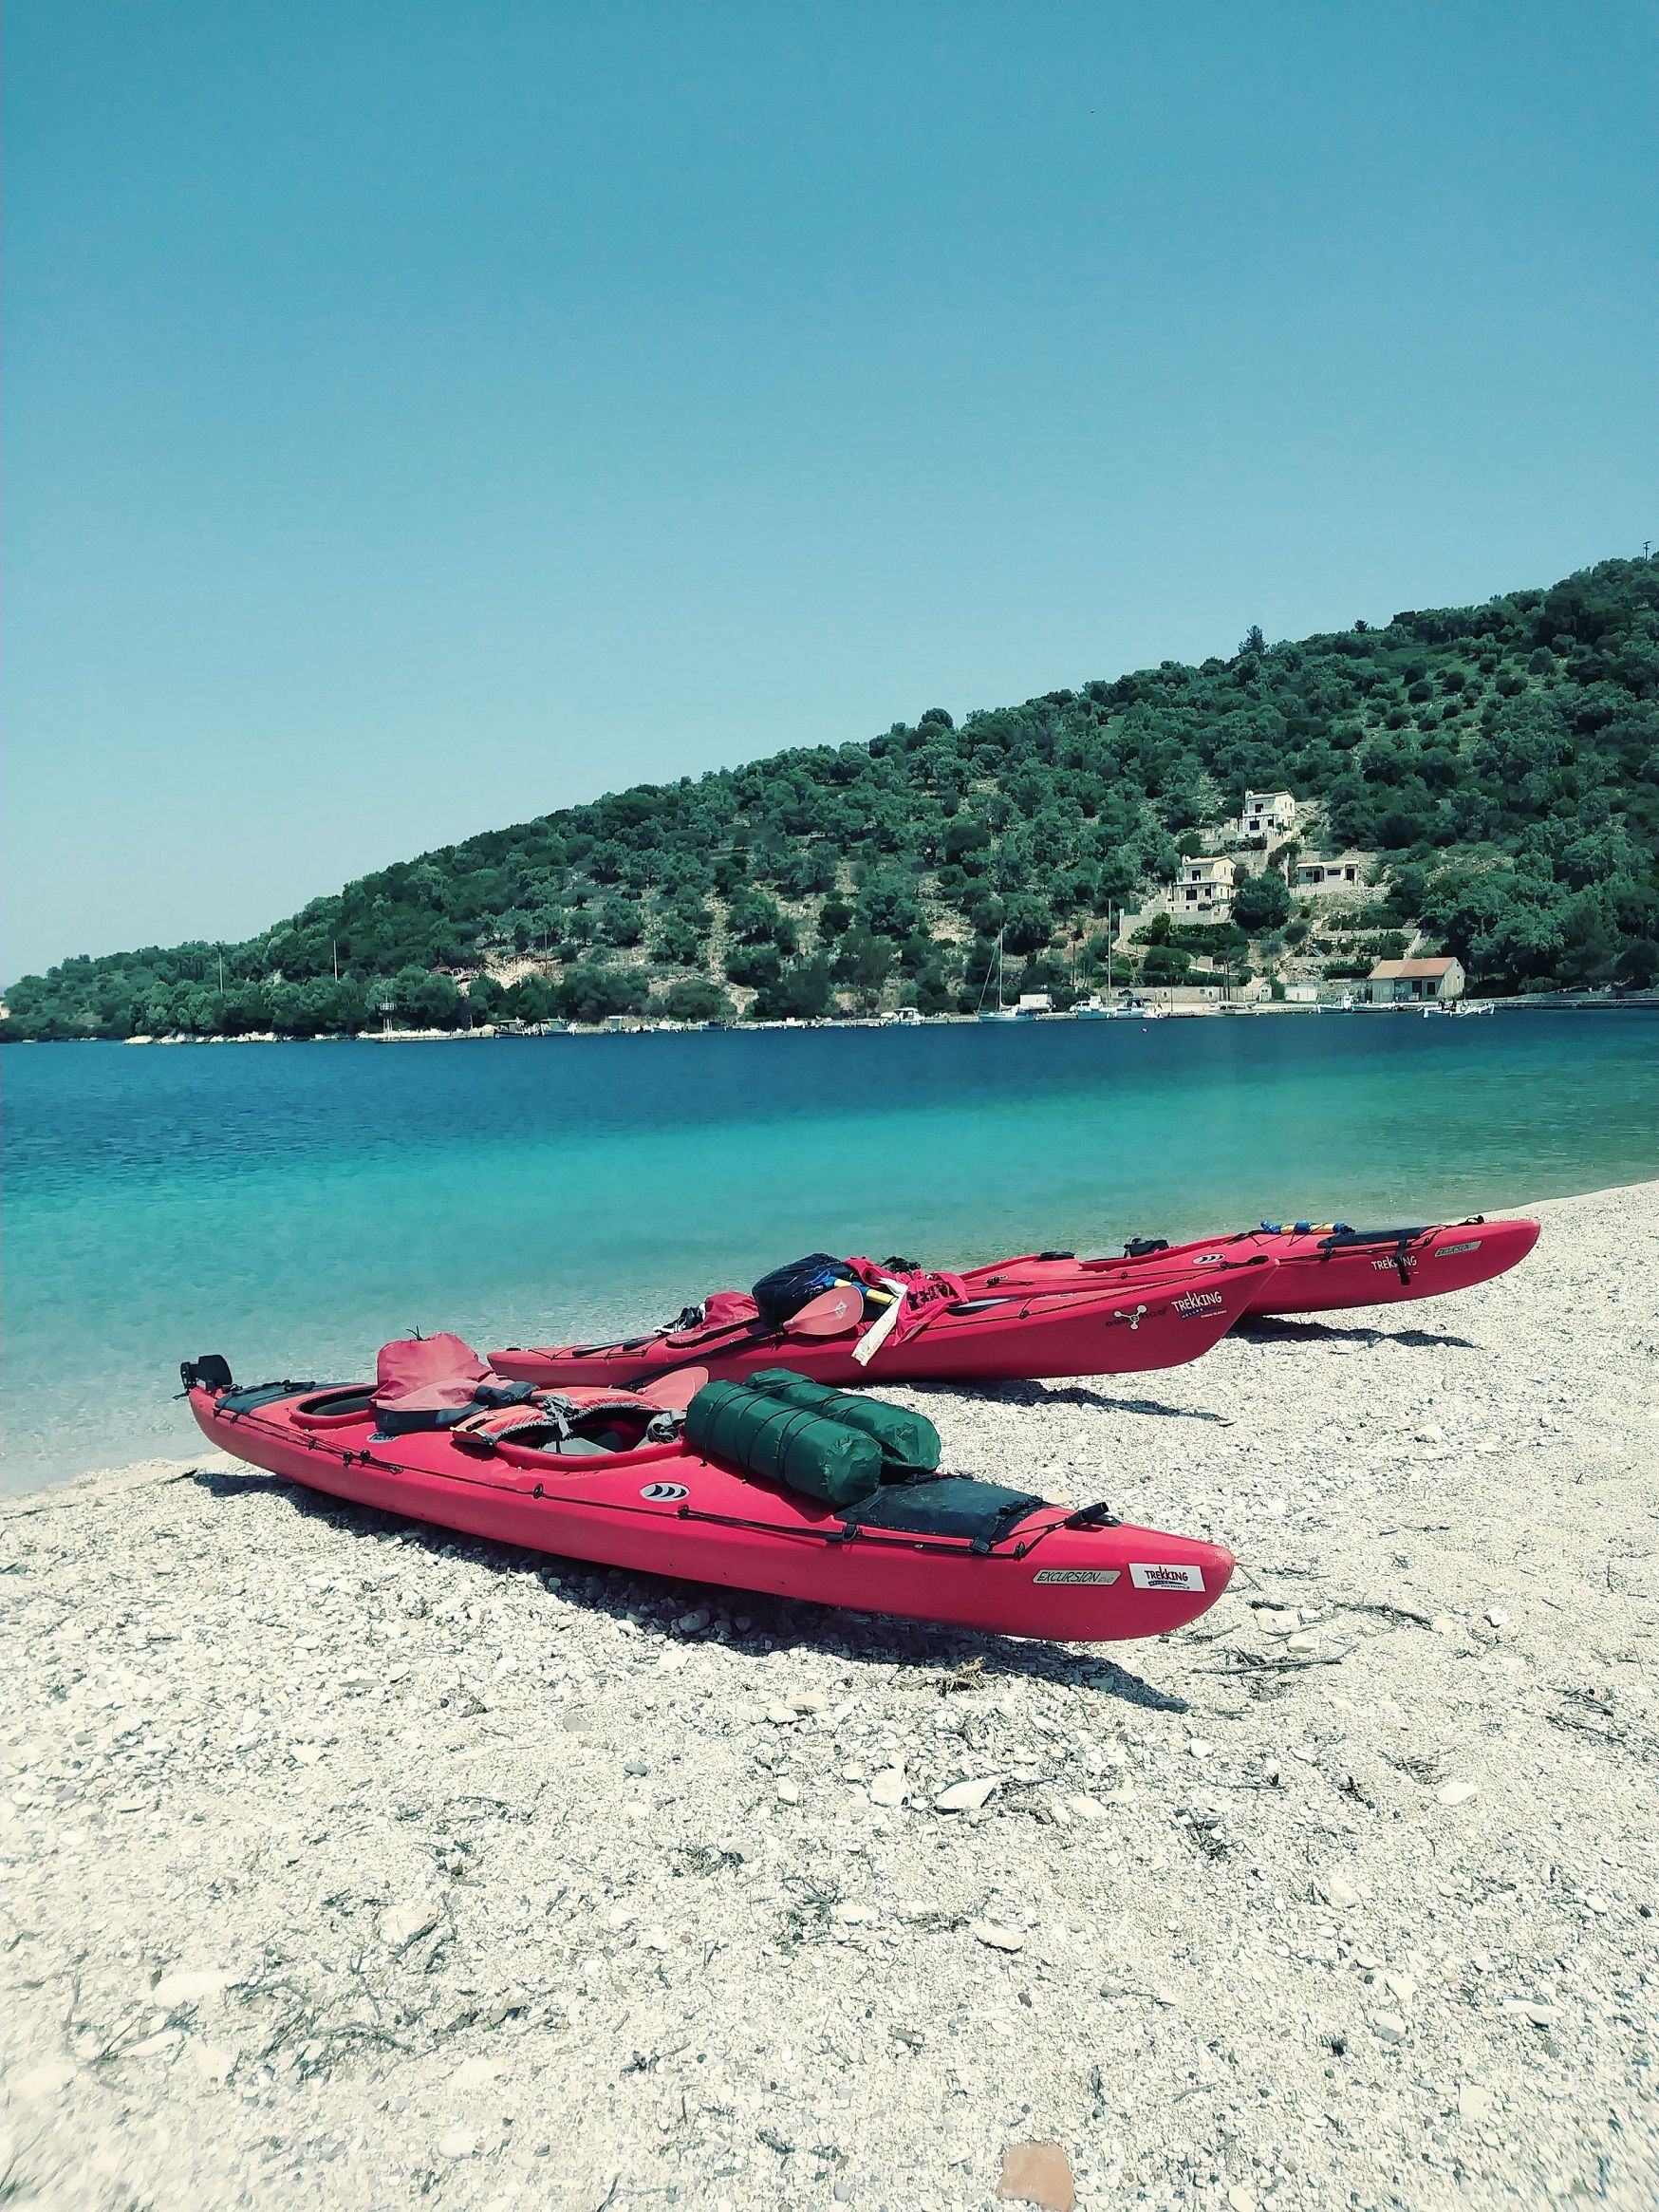 Kayaking and Wild Camping Deserted Islands in Greece: A Photo Story